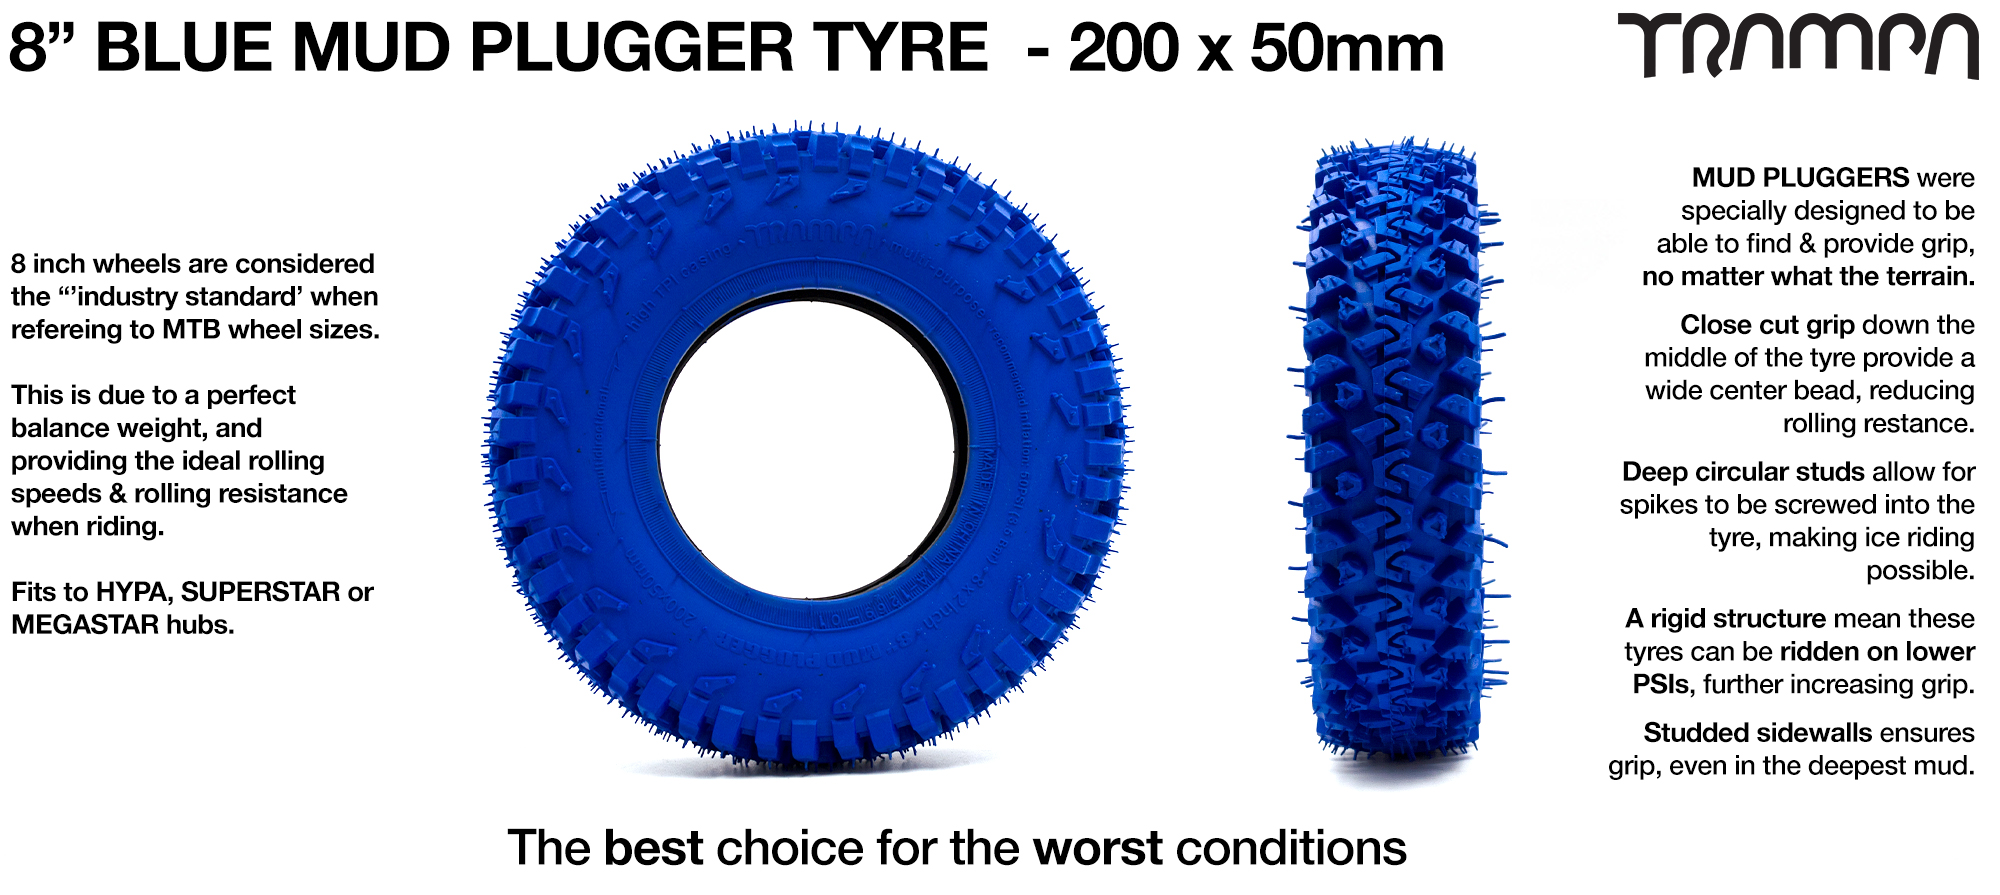 TRAMPA MUD-PLUGGER 8 Inch Tyre measure 3.75x 2x 8 Inch or 200x50mm with 3.75 inch Rim fits all 3.75 inch Hubs - BLUE